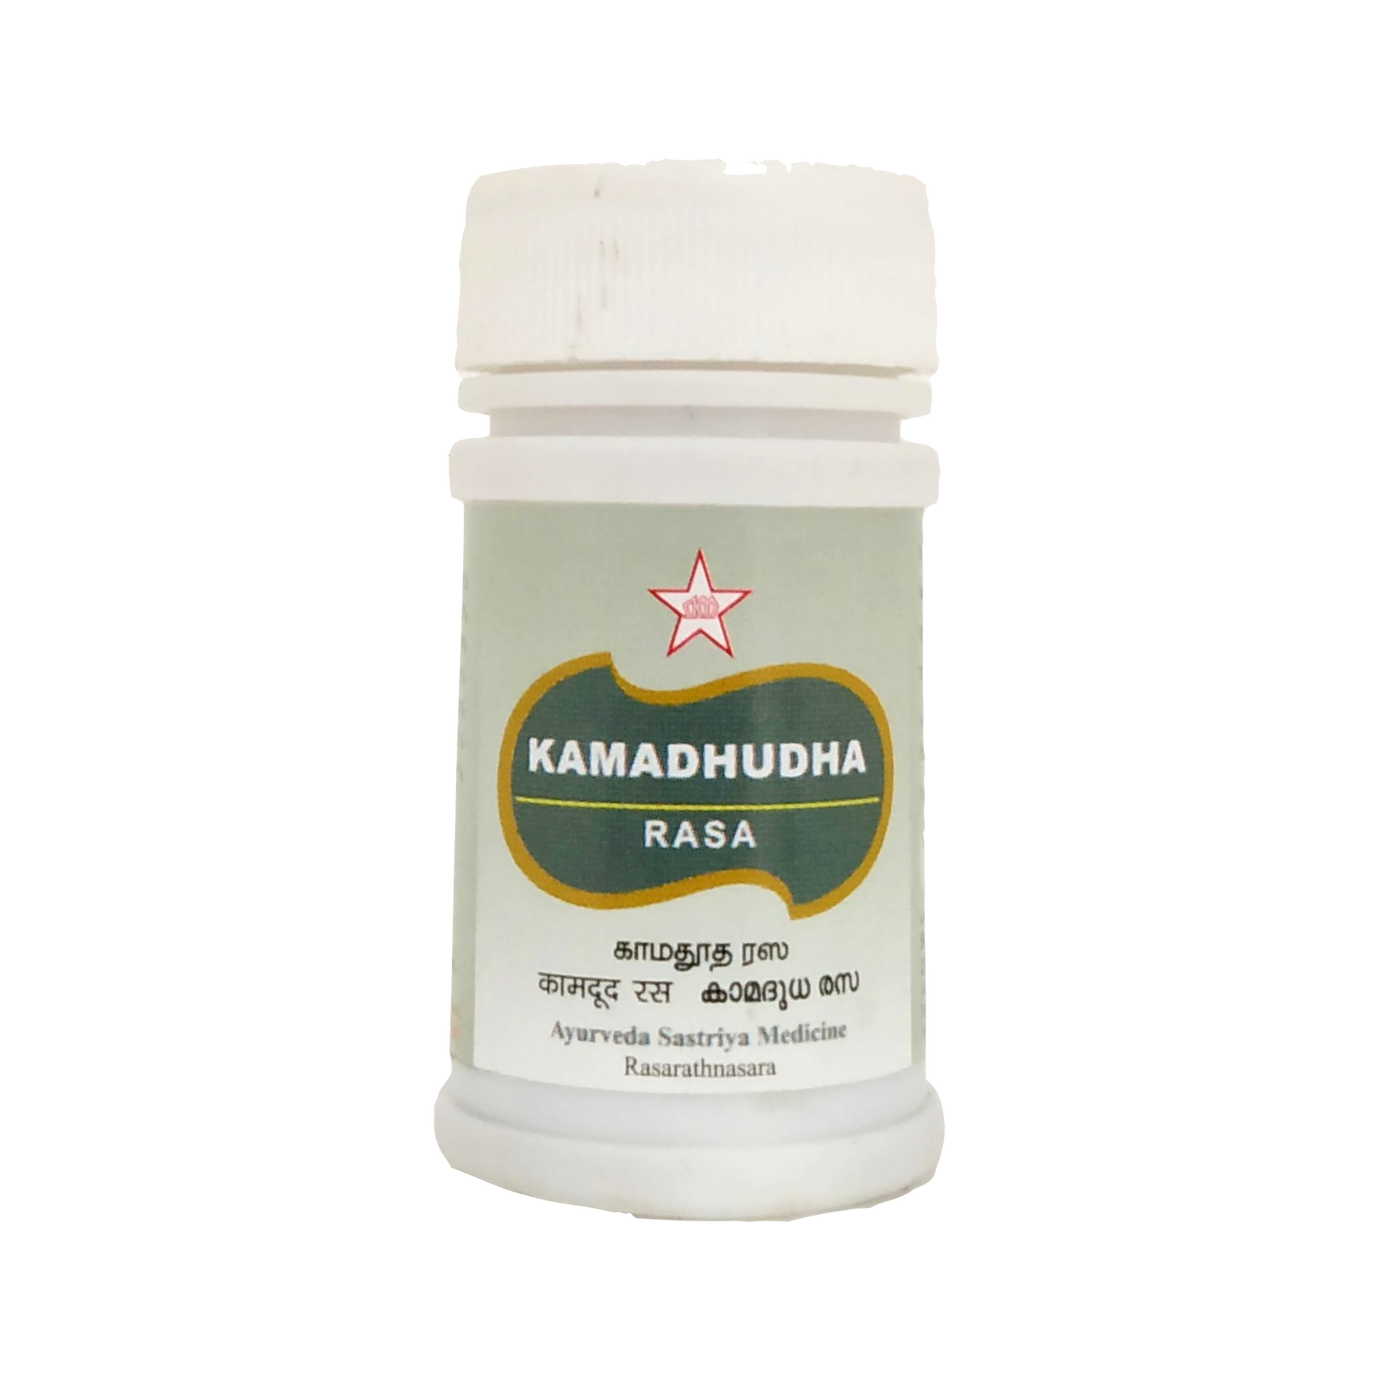 Shop Kamadhudha rasa tablets - 100Tablets at price 132.00 from Tablets Online - Ayush Care